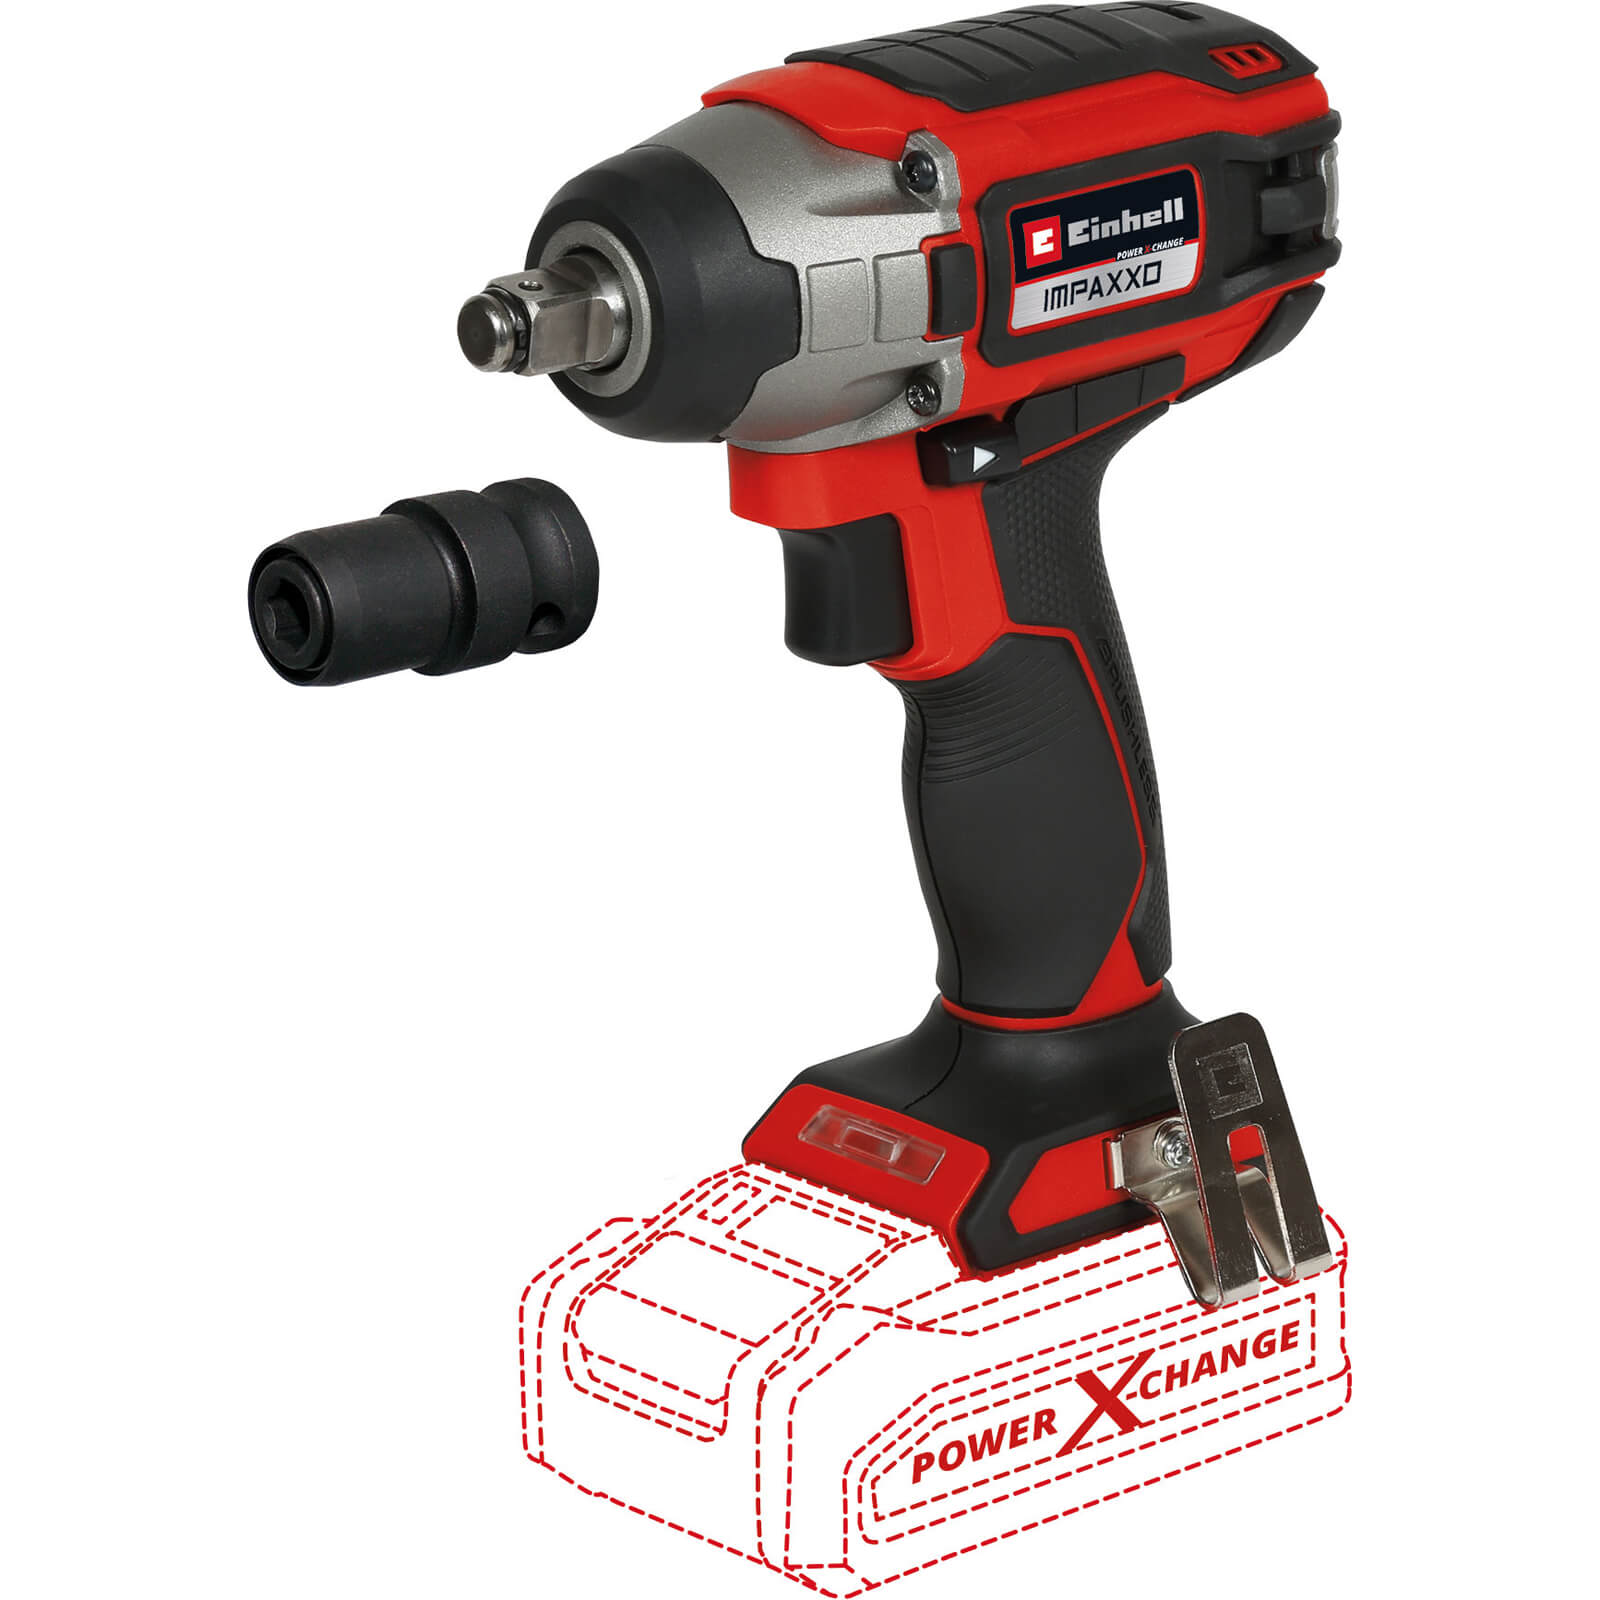 Image of Einhell IMPAXXO 18/230 18v Cordless Brushless 1/2" Impact Wrench No Batteries No Charger No Case